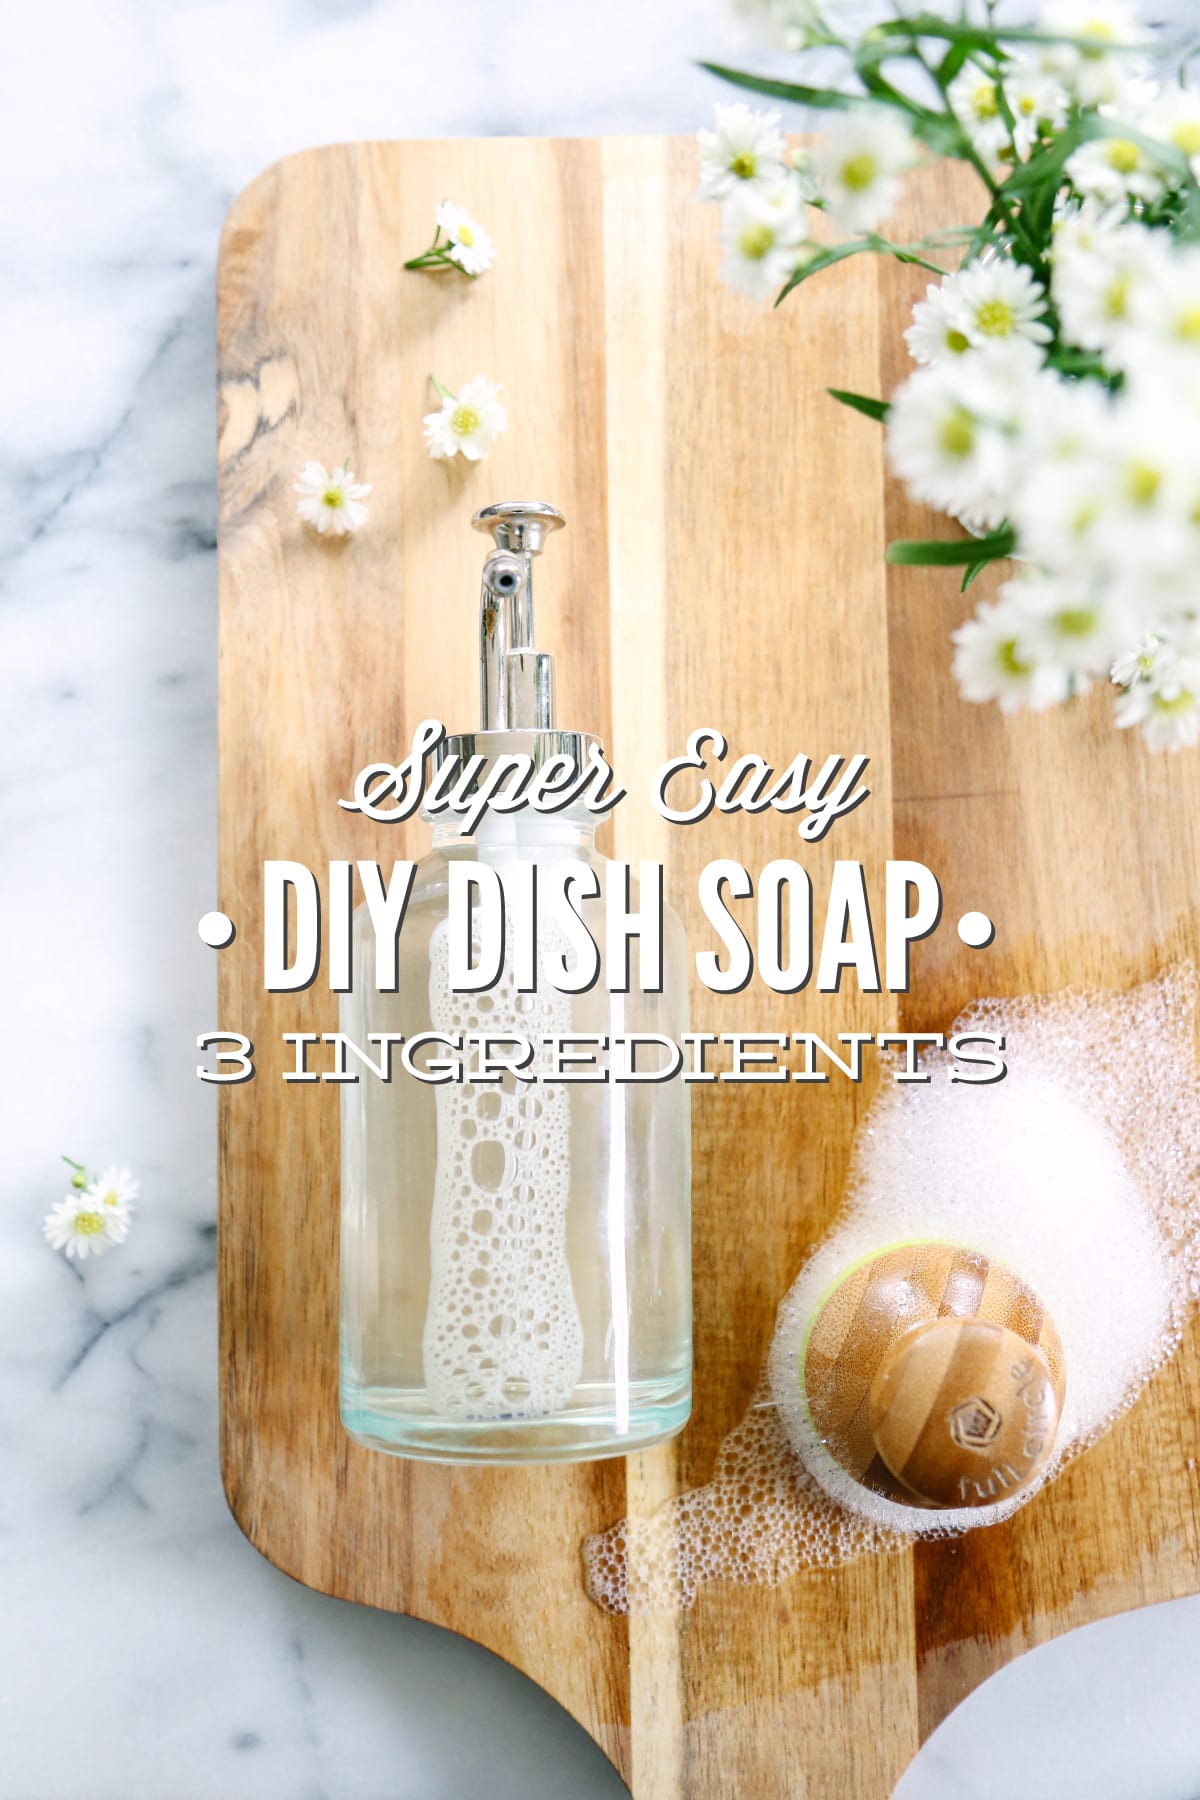 Super Easy DIY Dish Soap: 3 Ingredients (The Best “Homemade” Dish Soap Recipe)